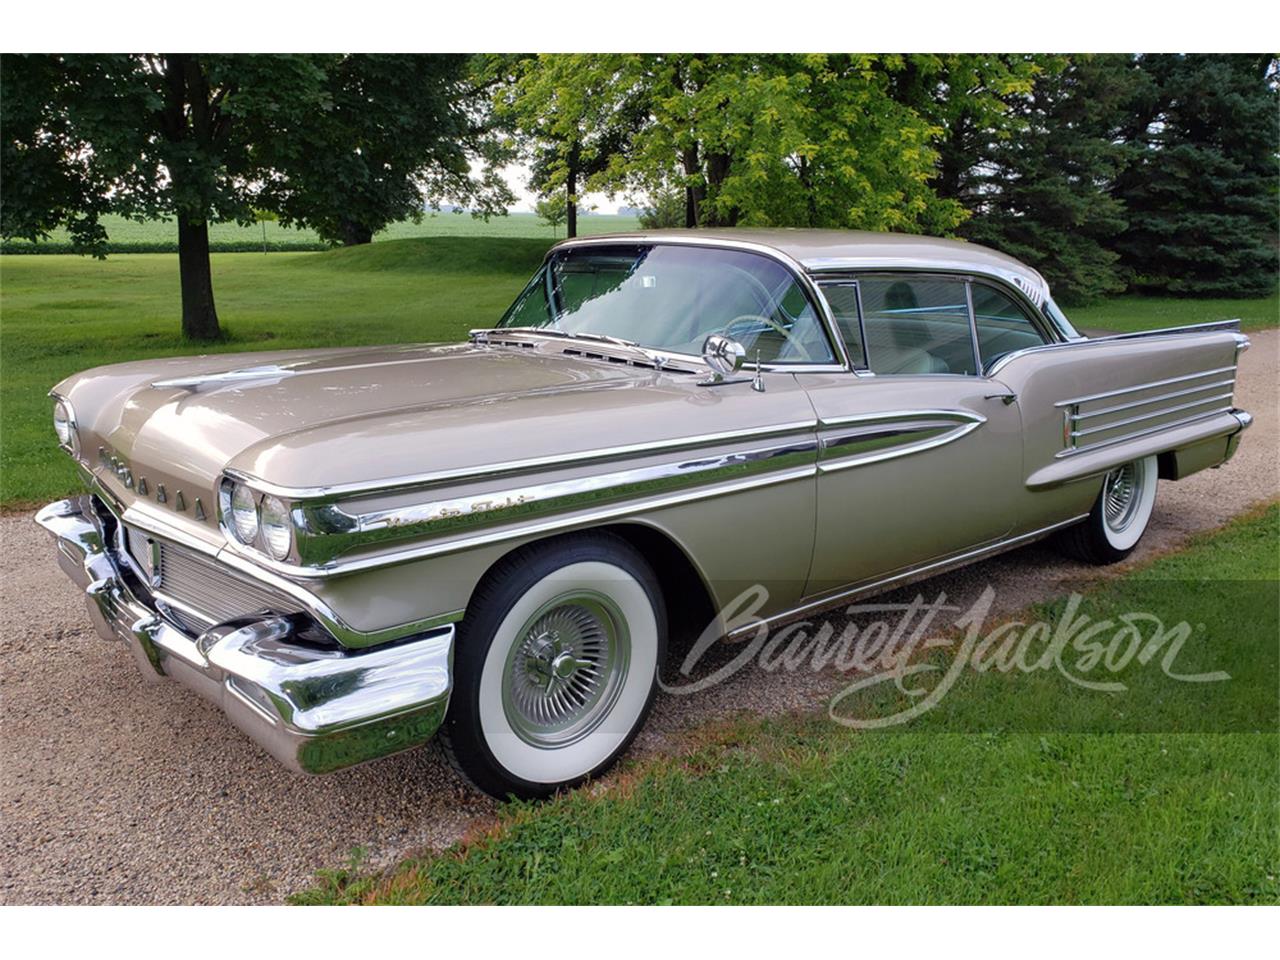 For Sale at Auction: 1958 Oldsmobile 98 in Scottsdale, Arizona for sale in Scottsdale, AZ